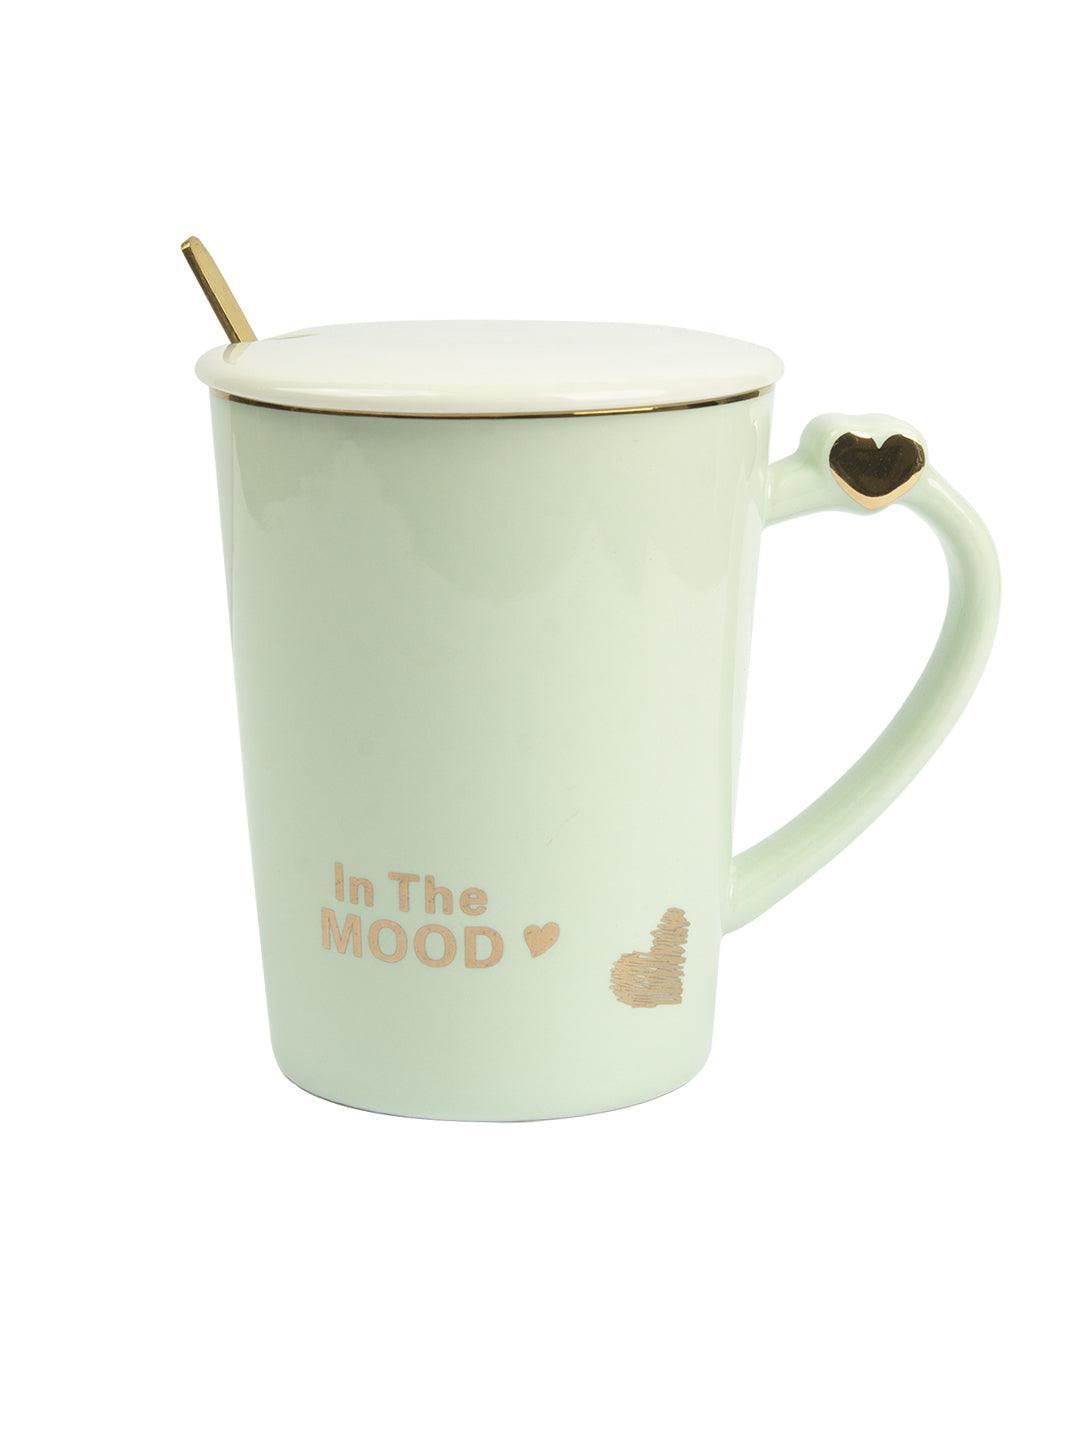 Coffee Mugs With Print 'In The MOOD' - 380mL - MARKET 99